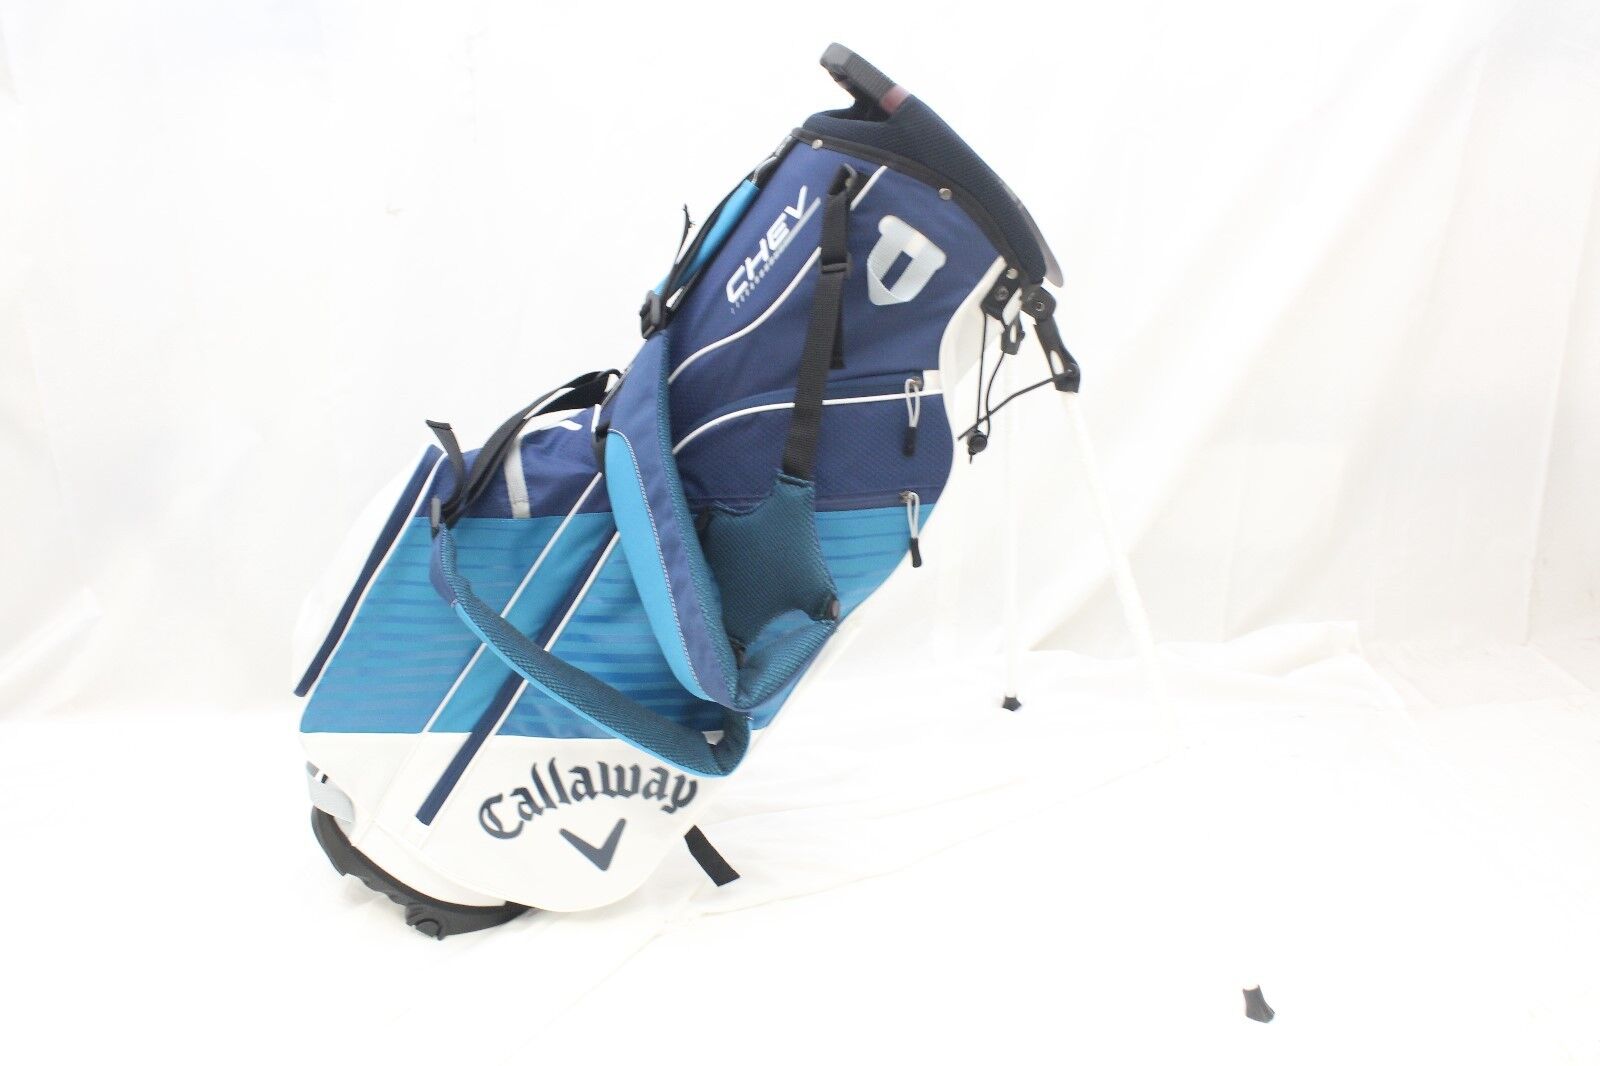 Brand New Callaway Chev 17 Golf Stand Bag Carry White Teal Navy 17